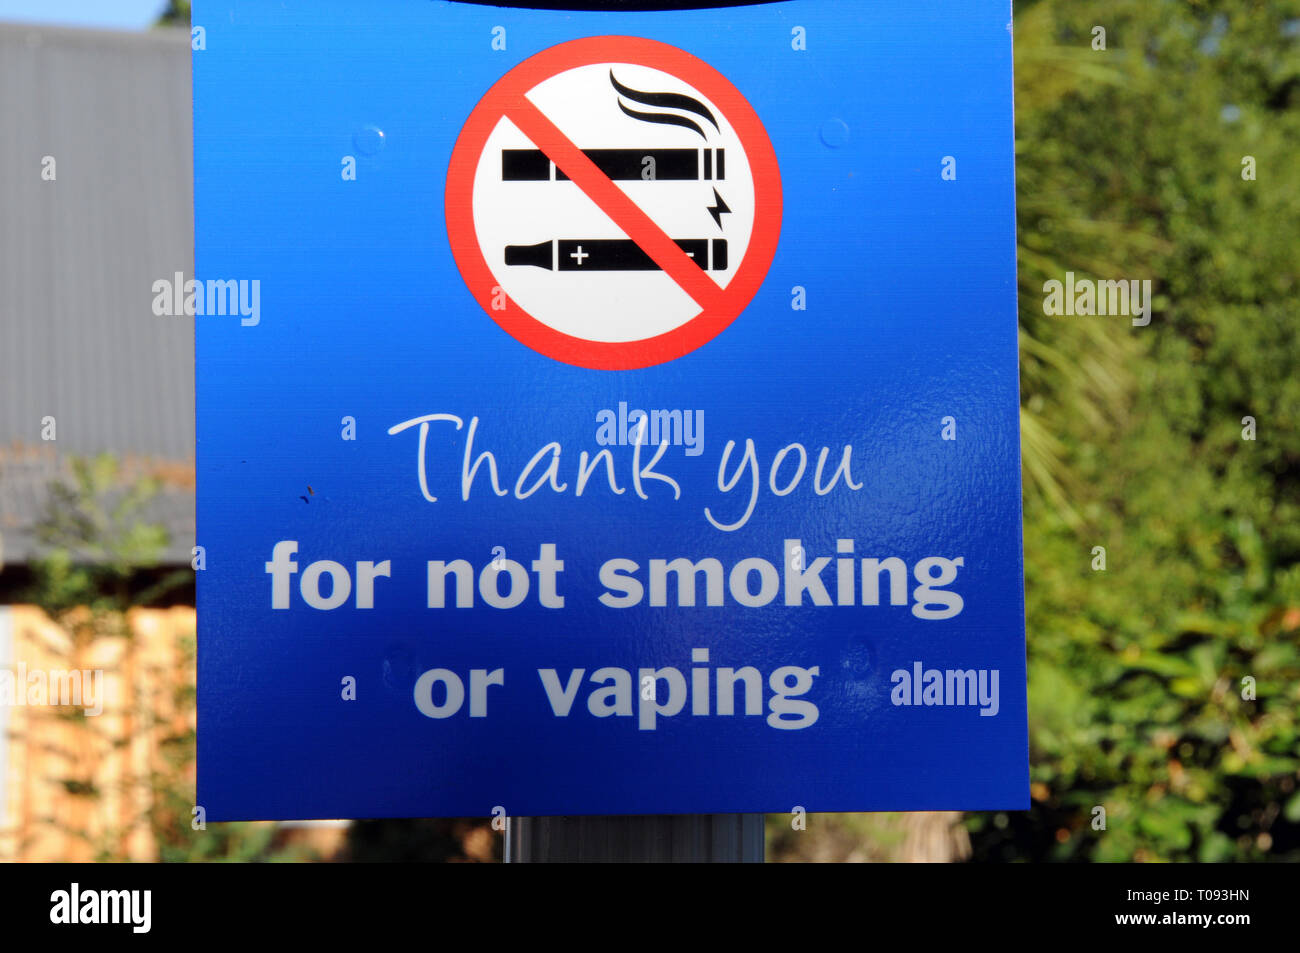 A no smaoking or vaping sign in the town of Hamner Springs, a resort area in the Canterbury region of New Zealands South Island. Stock Photo